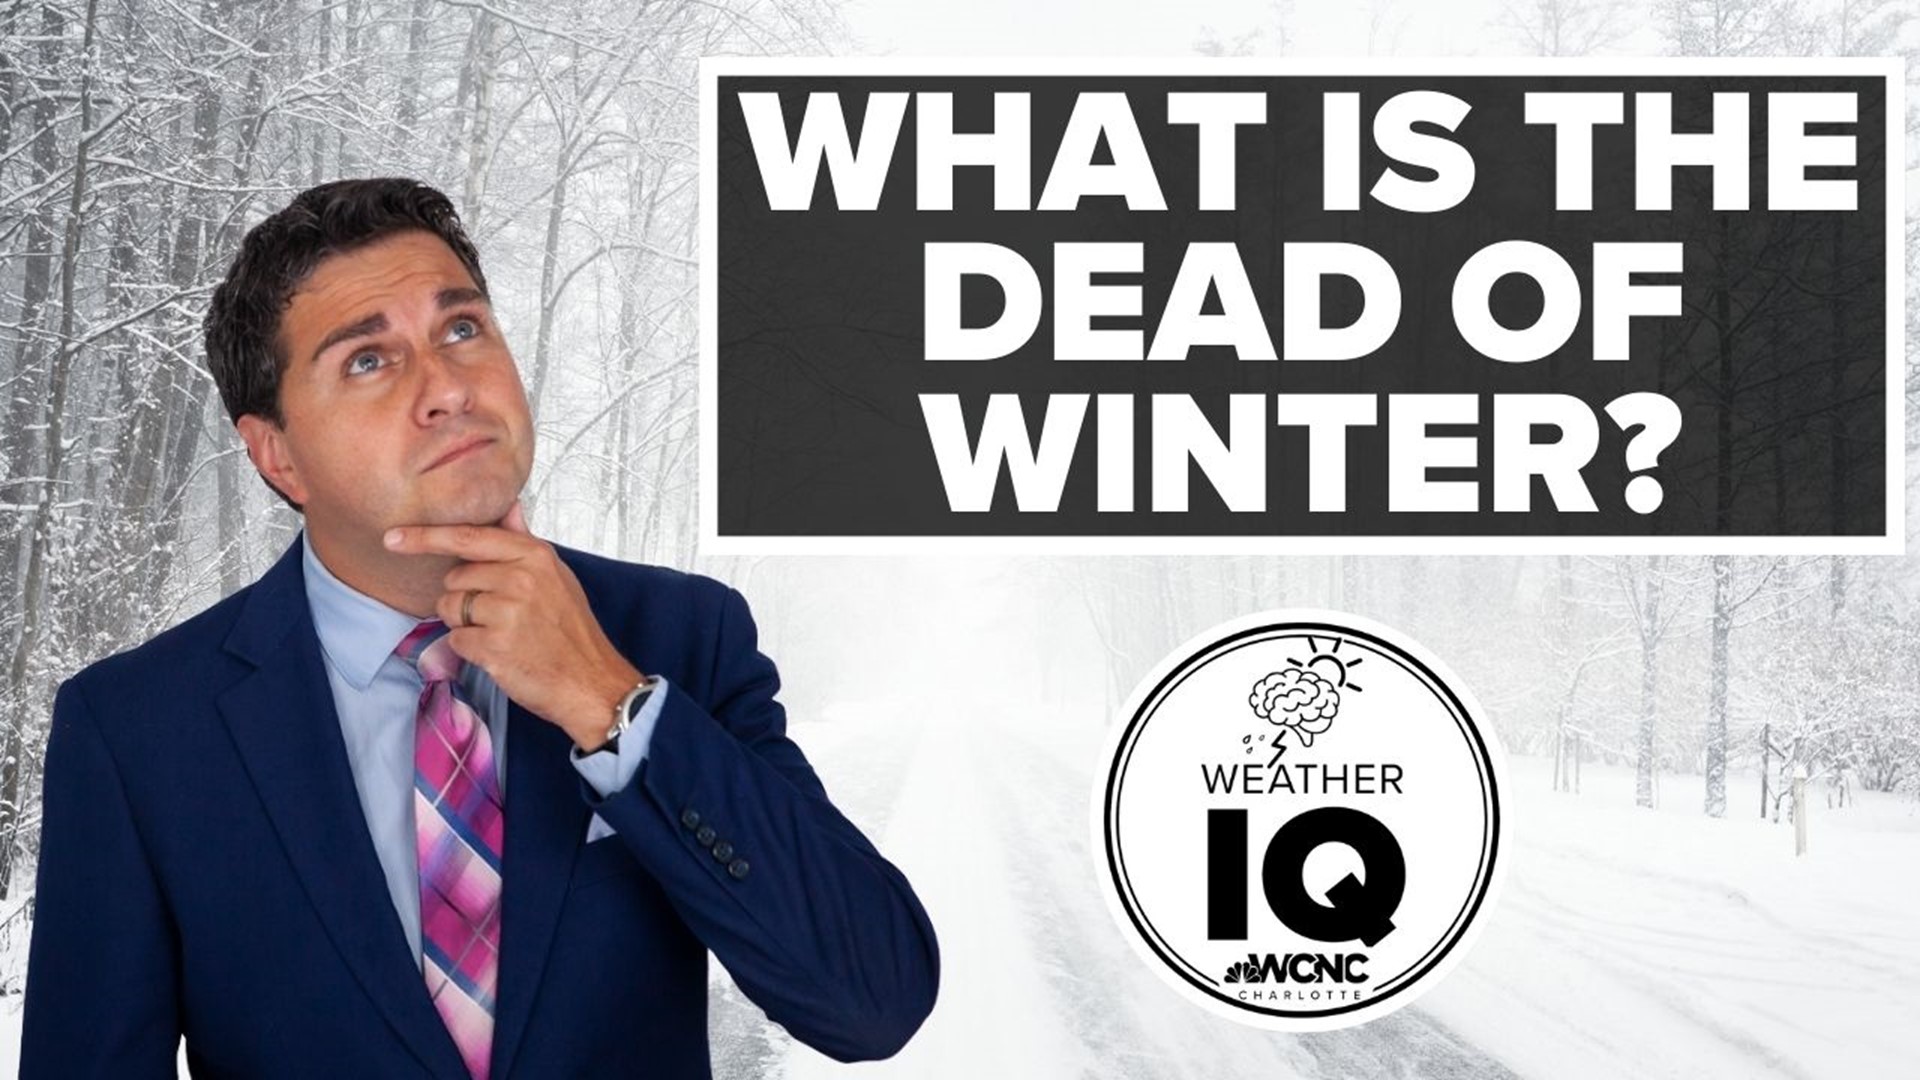 You've probably heard the old saying, the "dead of winter." When is it, and what exactly does it mean?